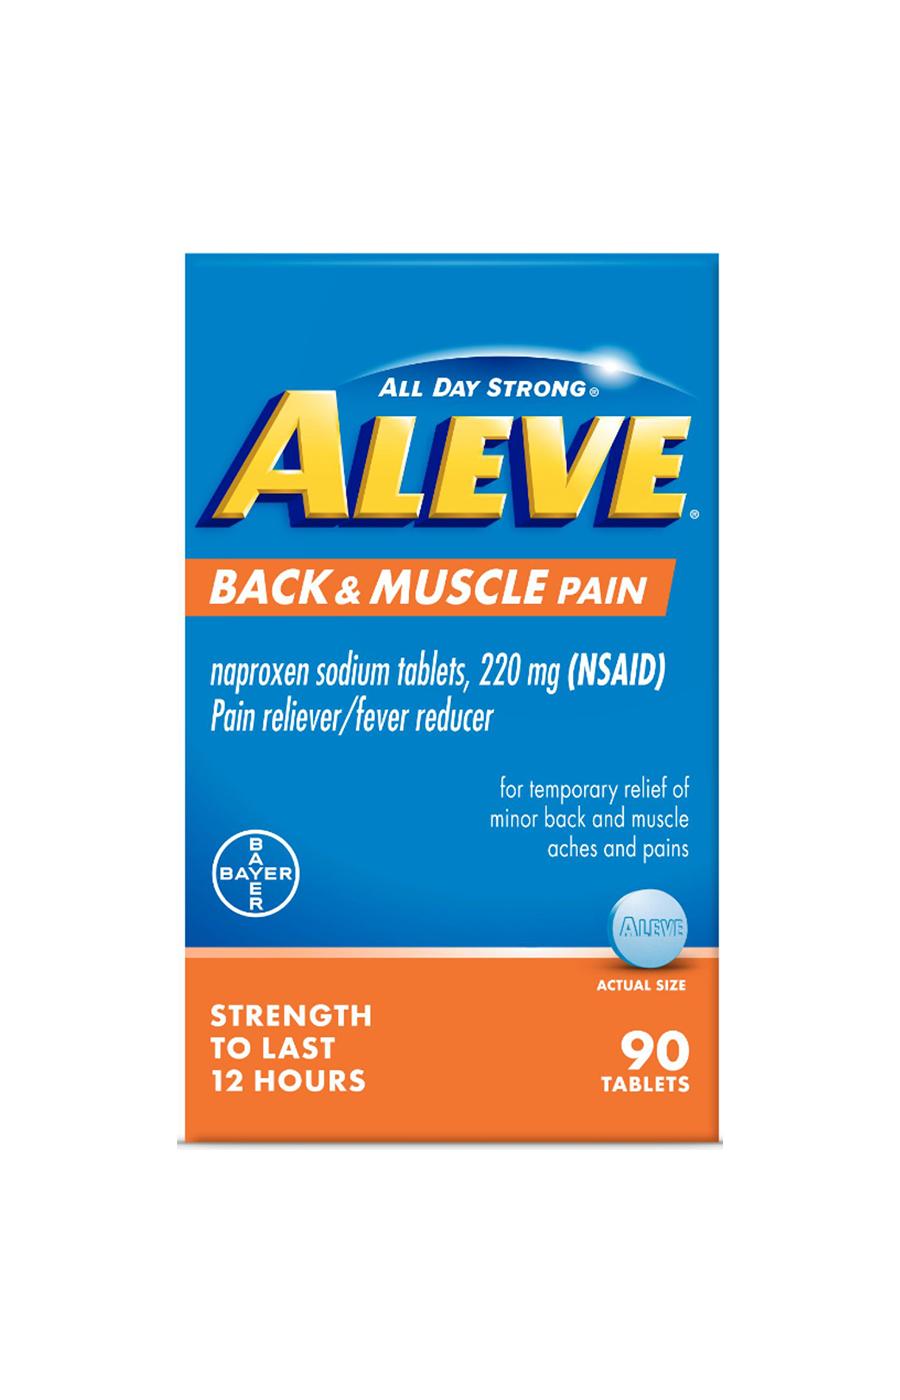 Aleve Back & Muscle Pain Naproxen 220mg Tablets; image 1 of 7